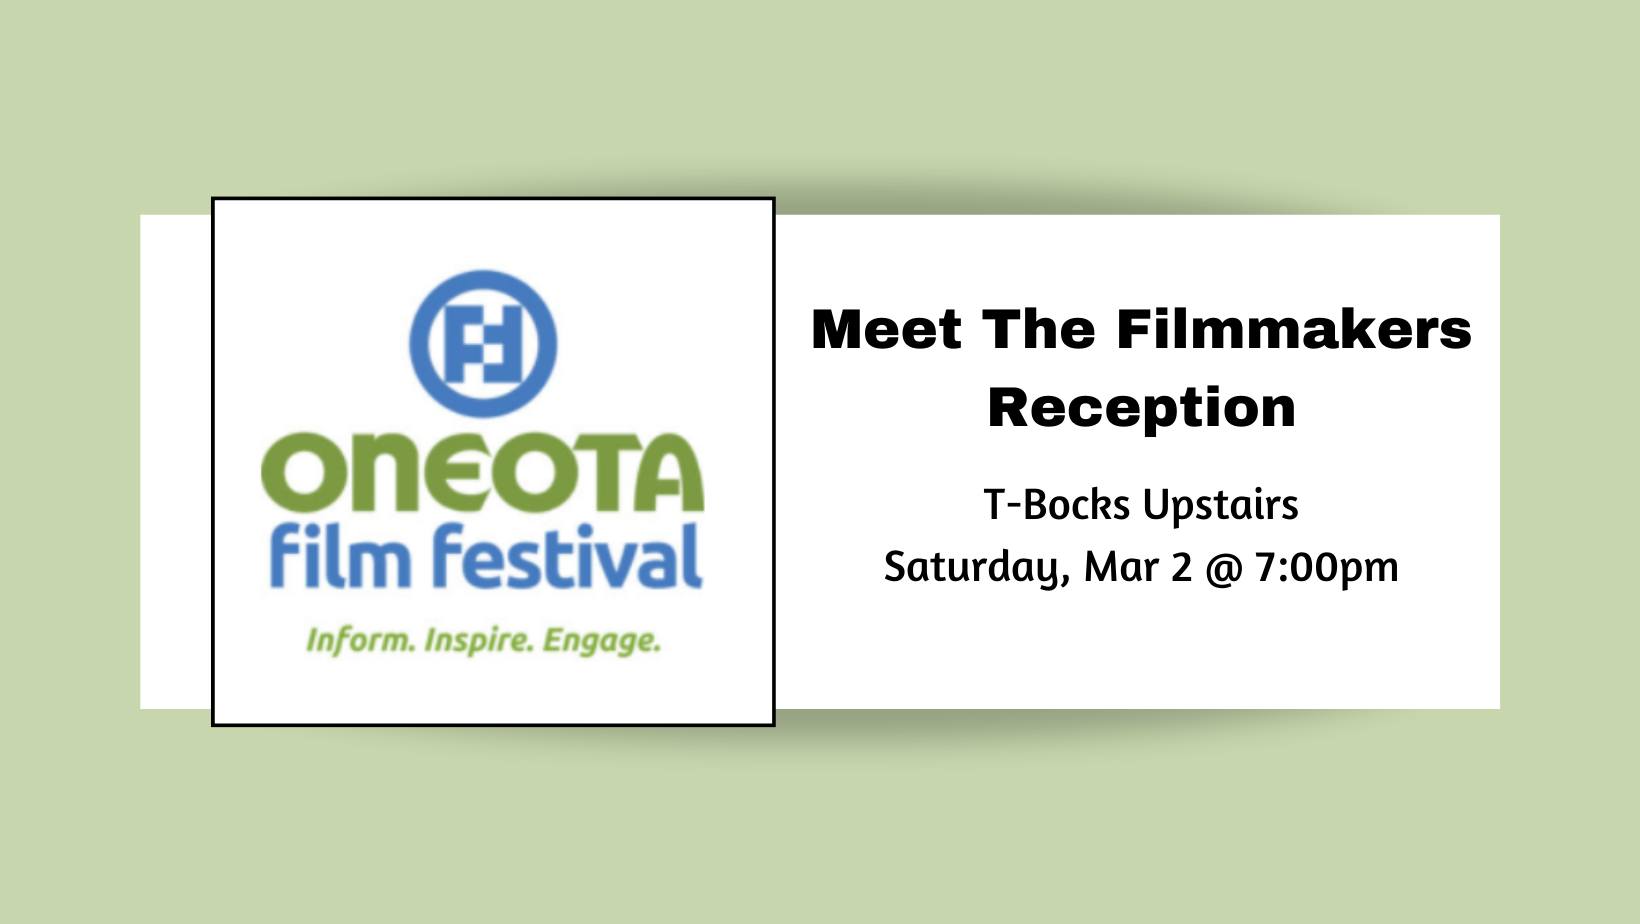 Meet the Filmmakers Reception with Oneota Film Festival thumbnail